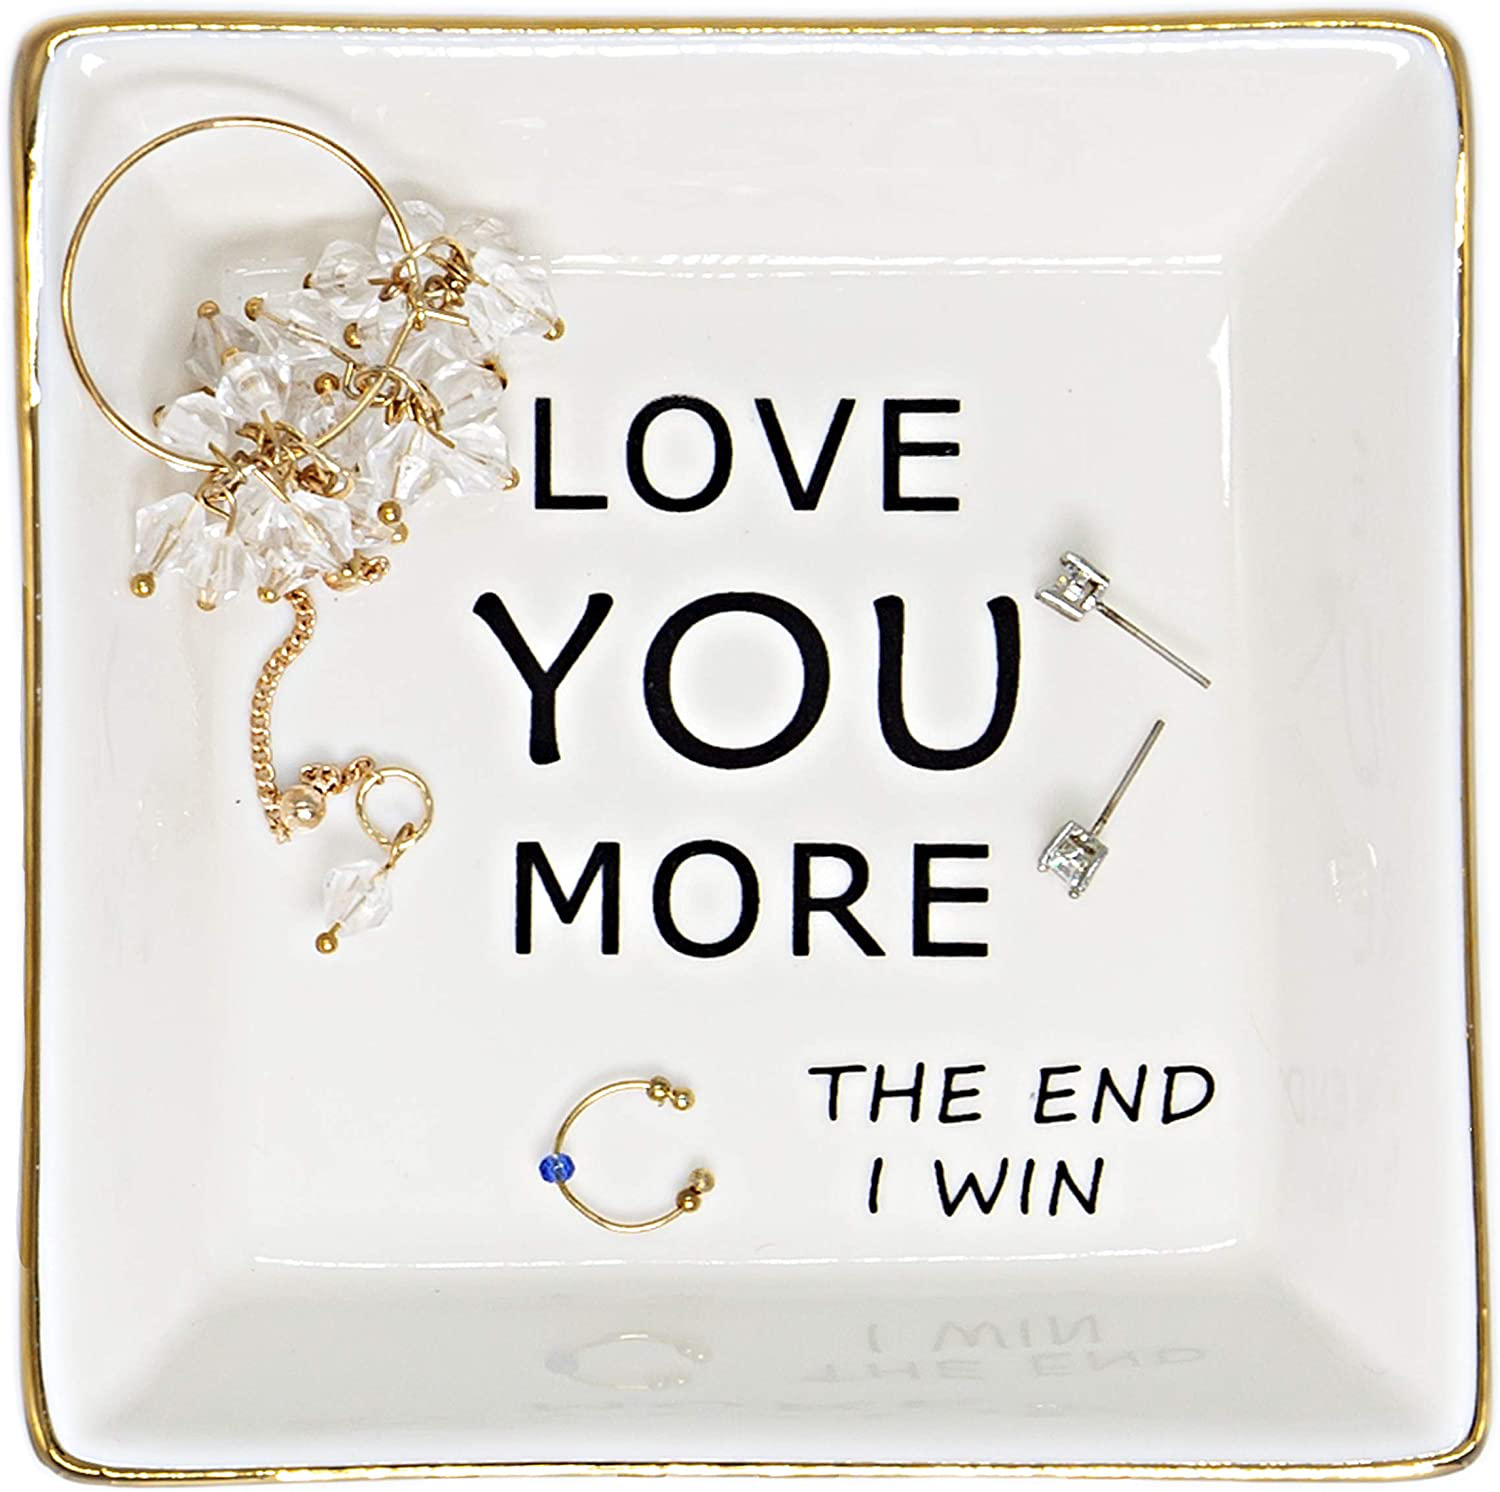 "Love You More" Trinket Dish, Gifts for Women Ceramic Ring Dish with Golden Trim, Jewelry Dish Gifts for Mom